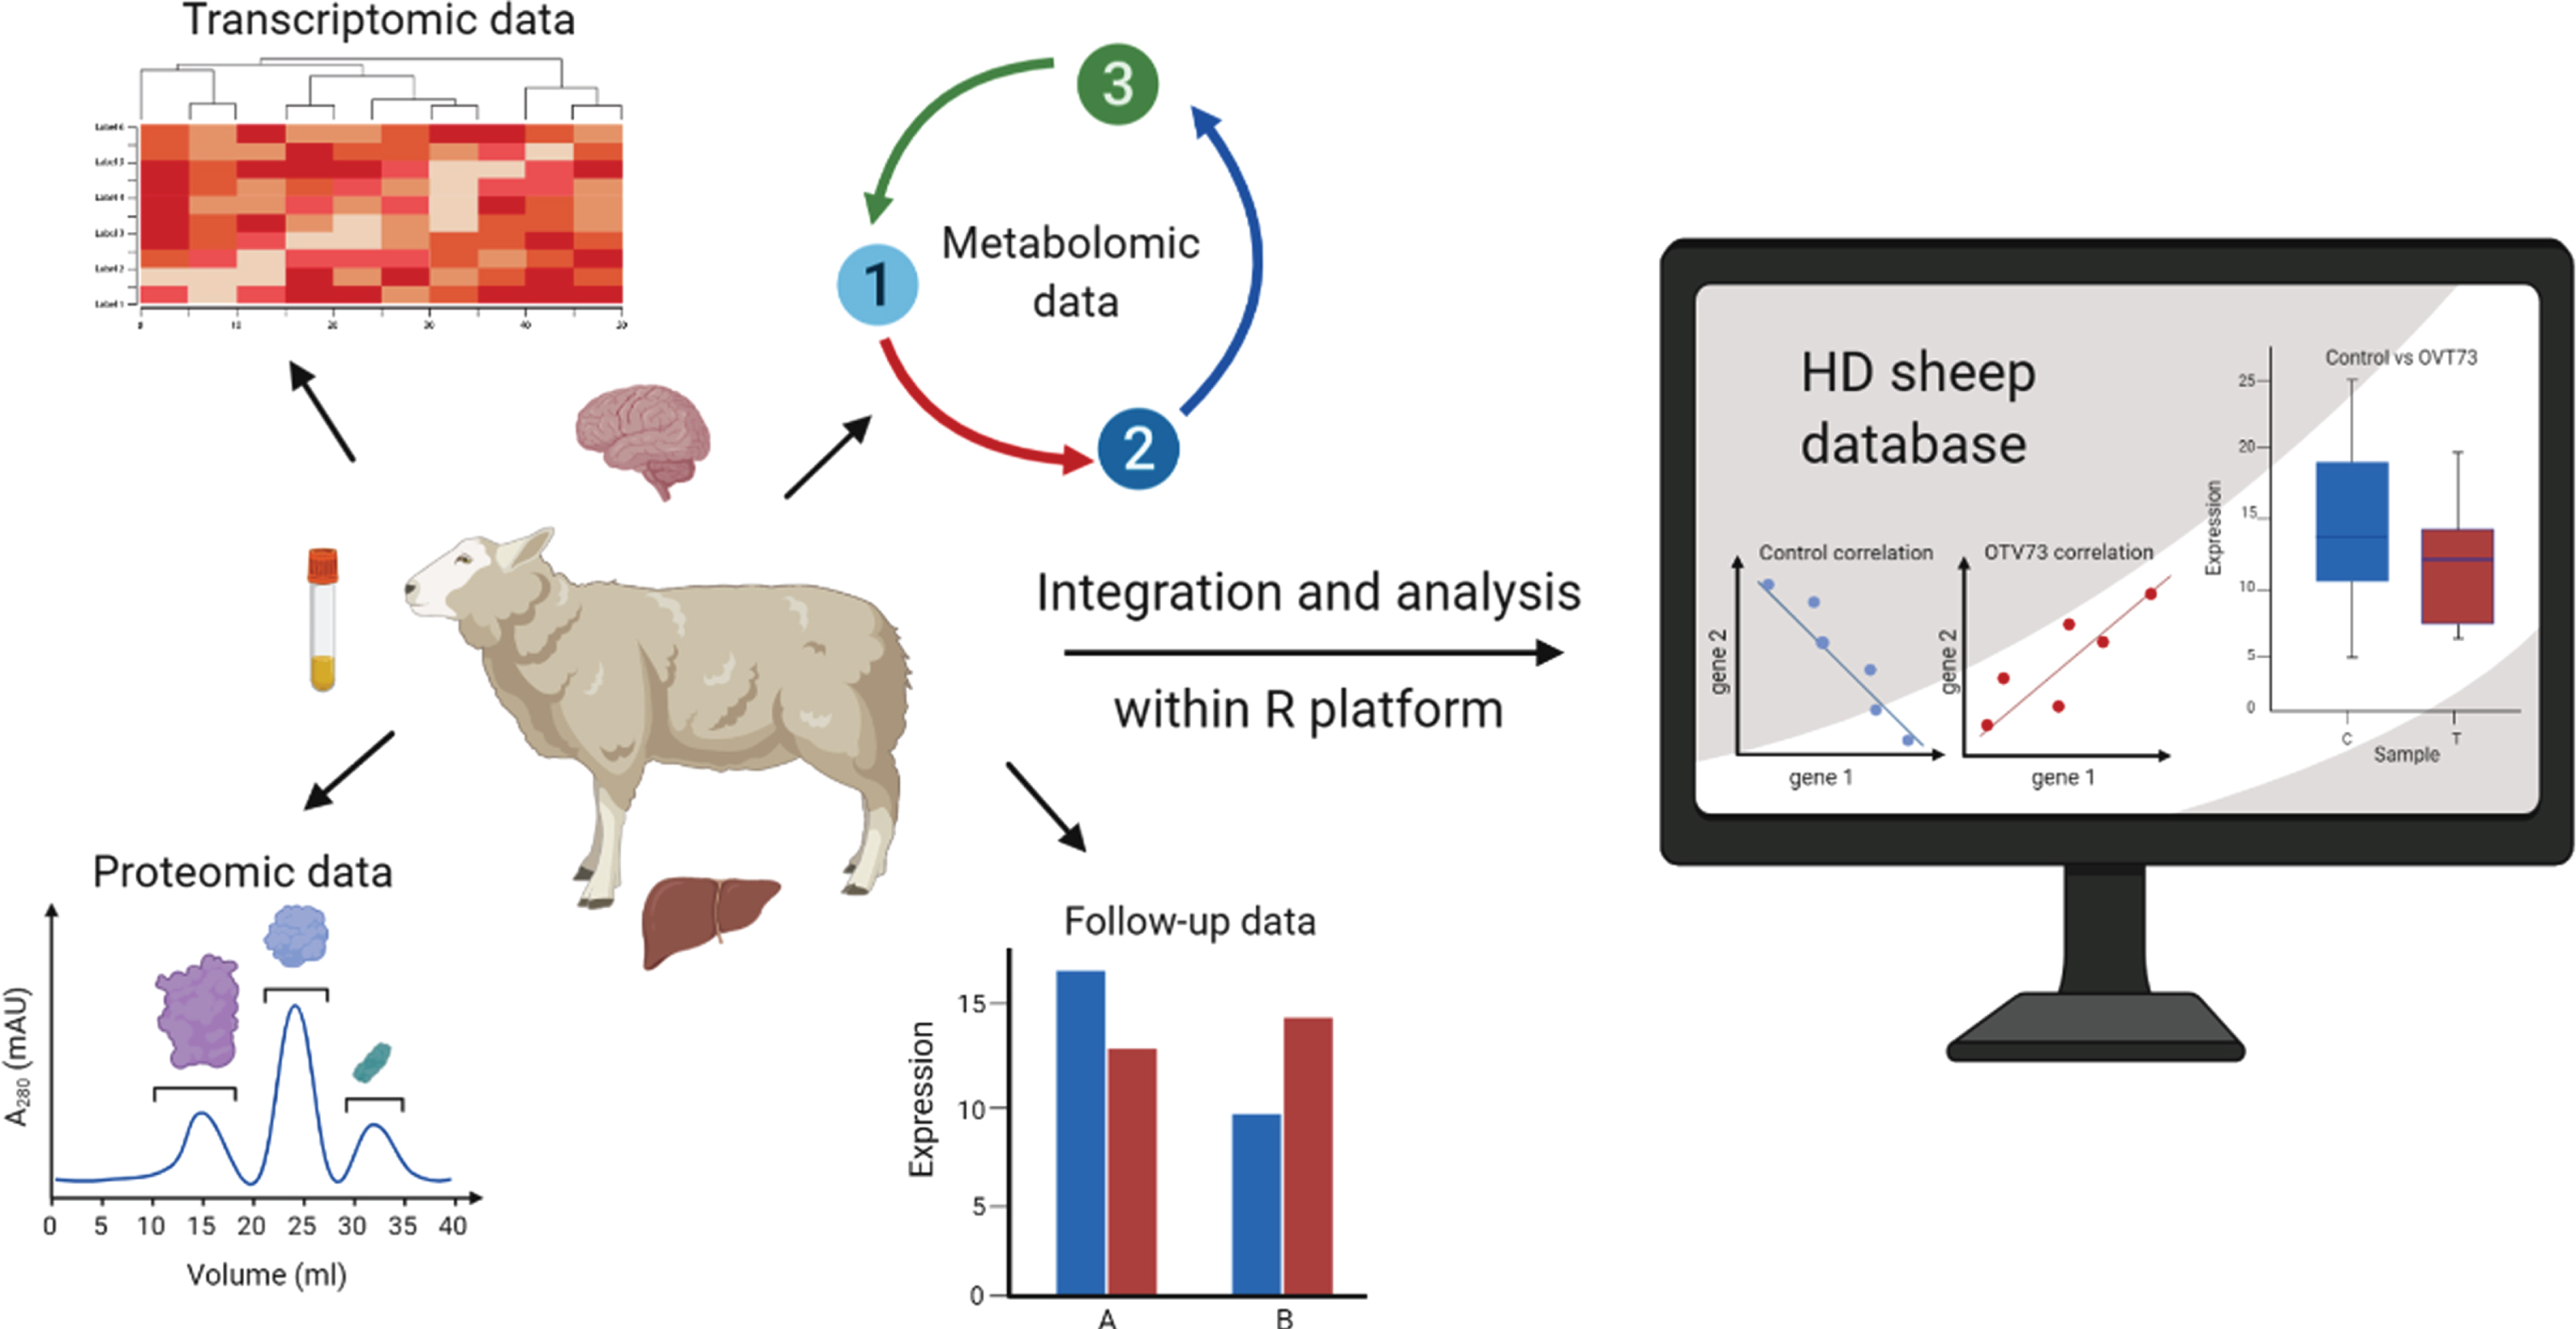 An overview of our approach to the integration and exploratory analysis of multi-omic data from a sheep model of Huntington’s disease. Seven datasets (transcriptomic, metabolic, and proteomic) collected from brain and peripheral tissues of a single cohort of 5-year-old OVT73 (n = 6) and control (n = 6) sheep were integrated into a multi-omic platform in R for multivariate analyses. Within the platform, individual datasets can be analysed and visualised using a range of exploratory multivariate techniques as presented in this report. The data and a selection of statistical functions have been made available as a user-queryable, interactive, online database https://hdsheep.cer.auckland.ac.nz/Figure created with BioRender.com.